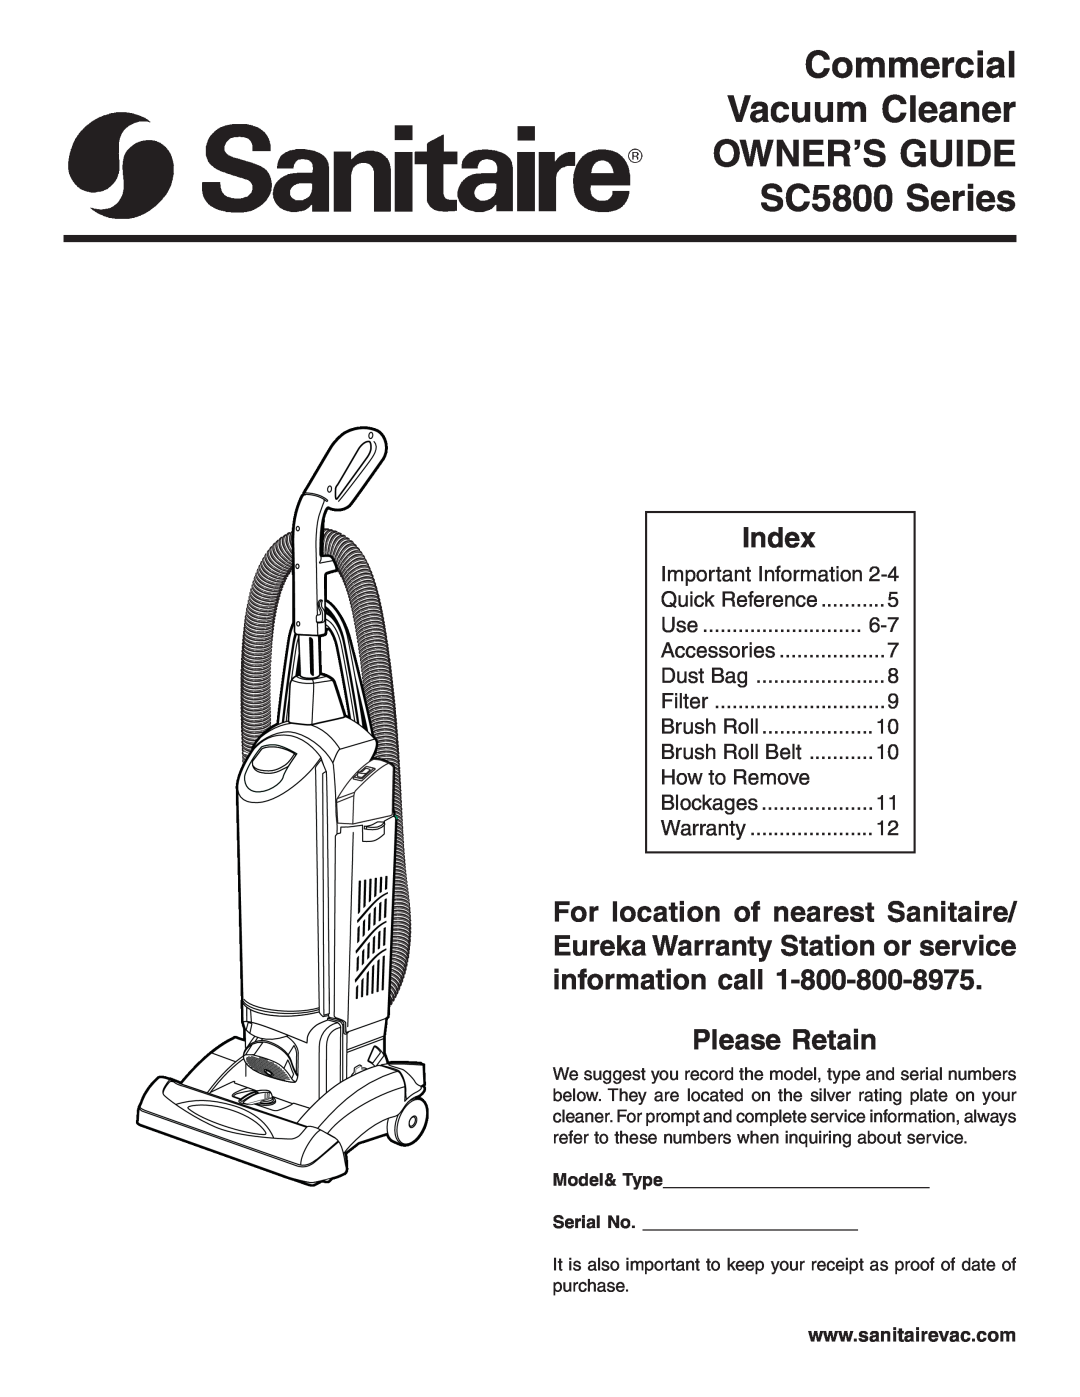 Sanitaire SC5800 Series warranty Commercial Vacuum Cleaner OWNER’S GUIDE, Index, Please Retain, Important Information 